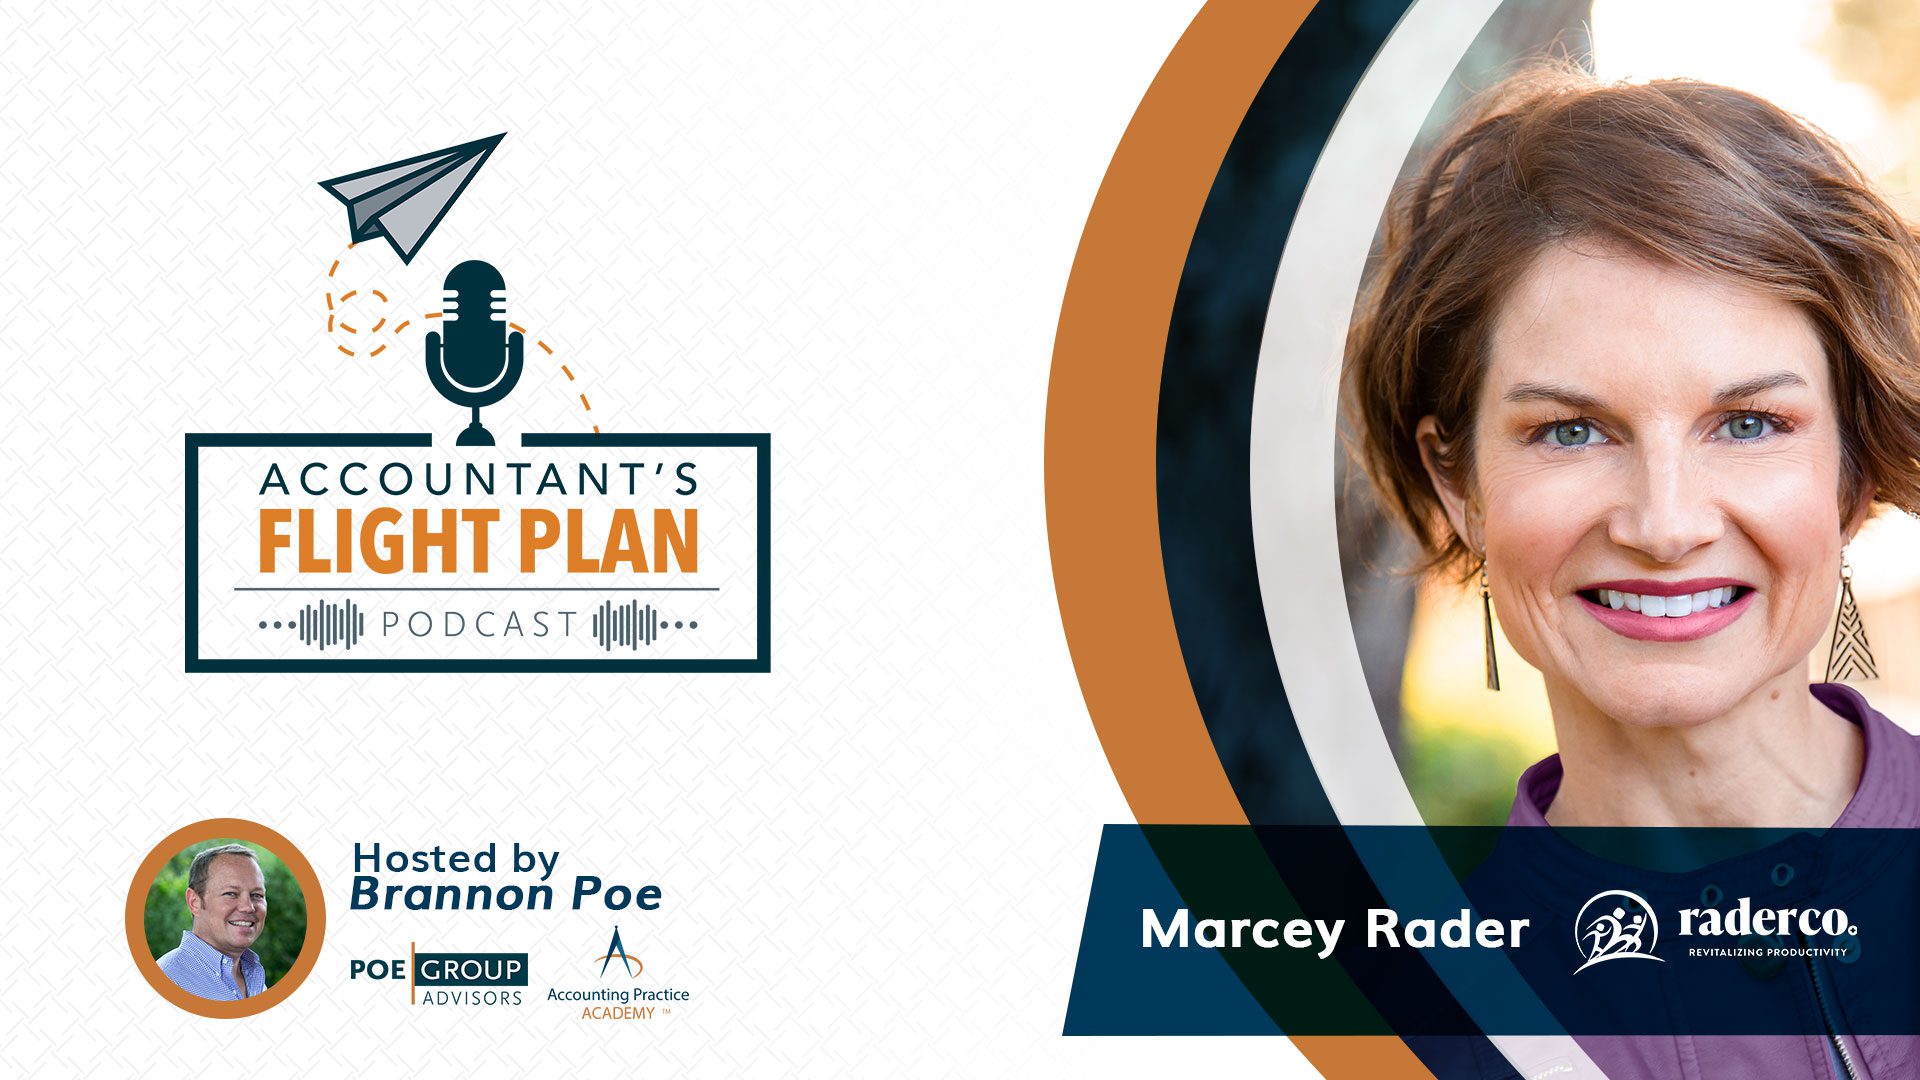 CPA Firm Productivity and Staff Retention - Podcast with Marcey Rader